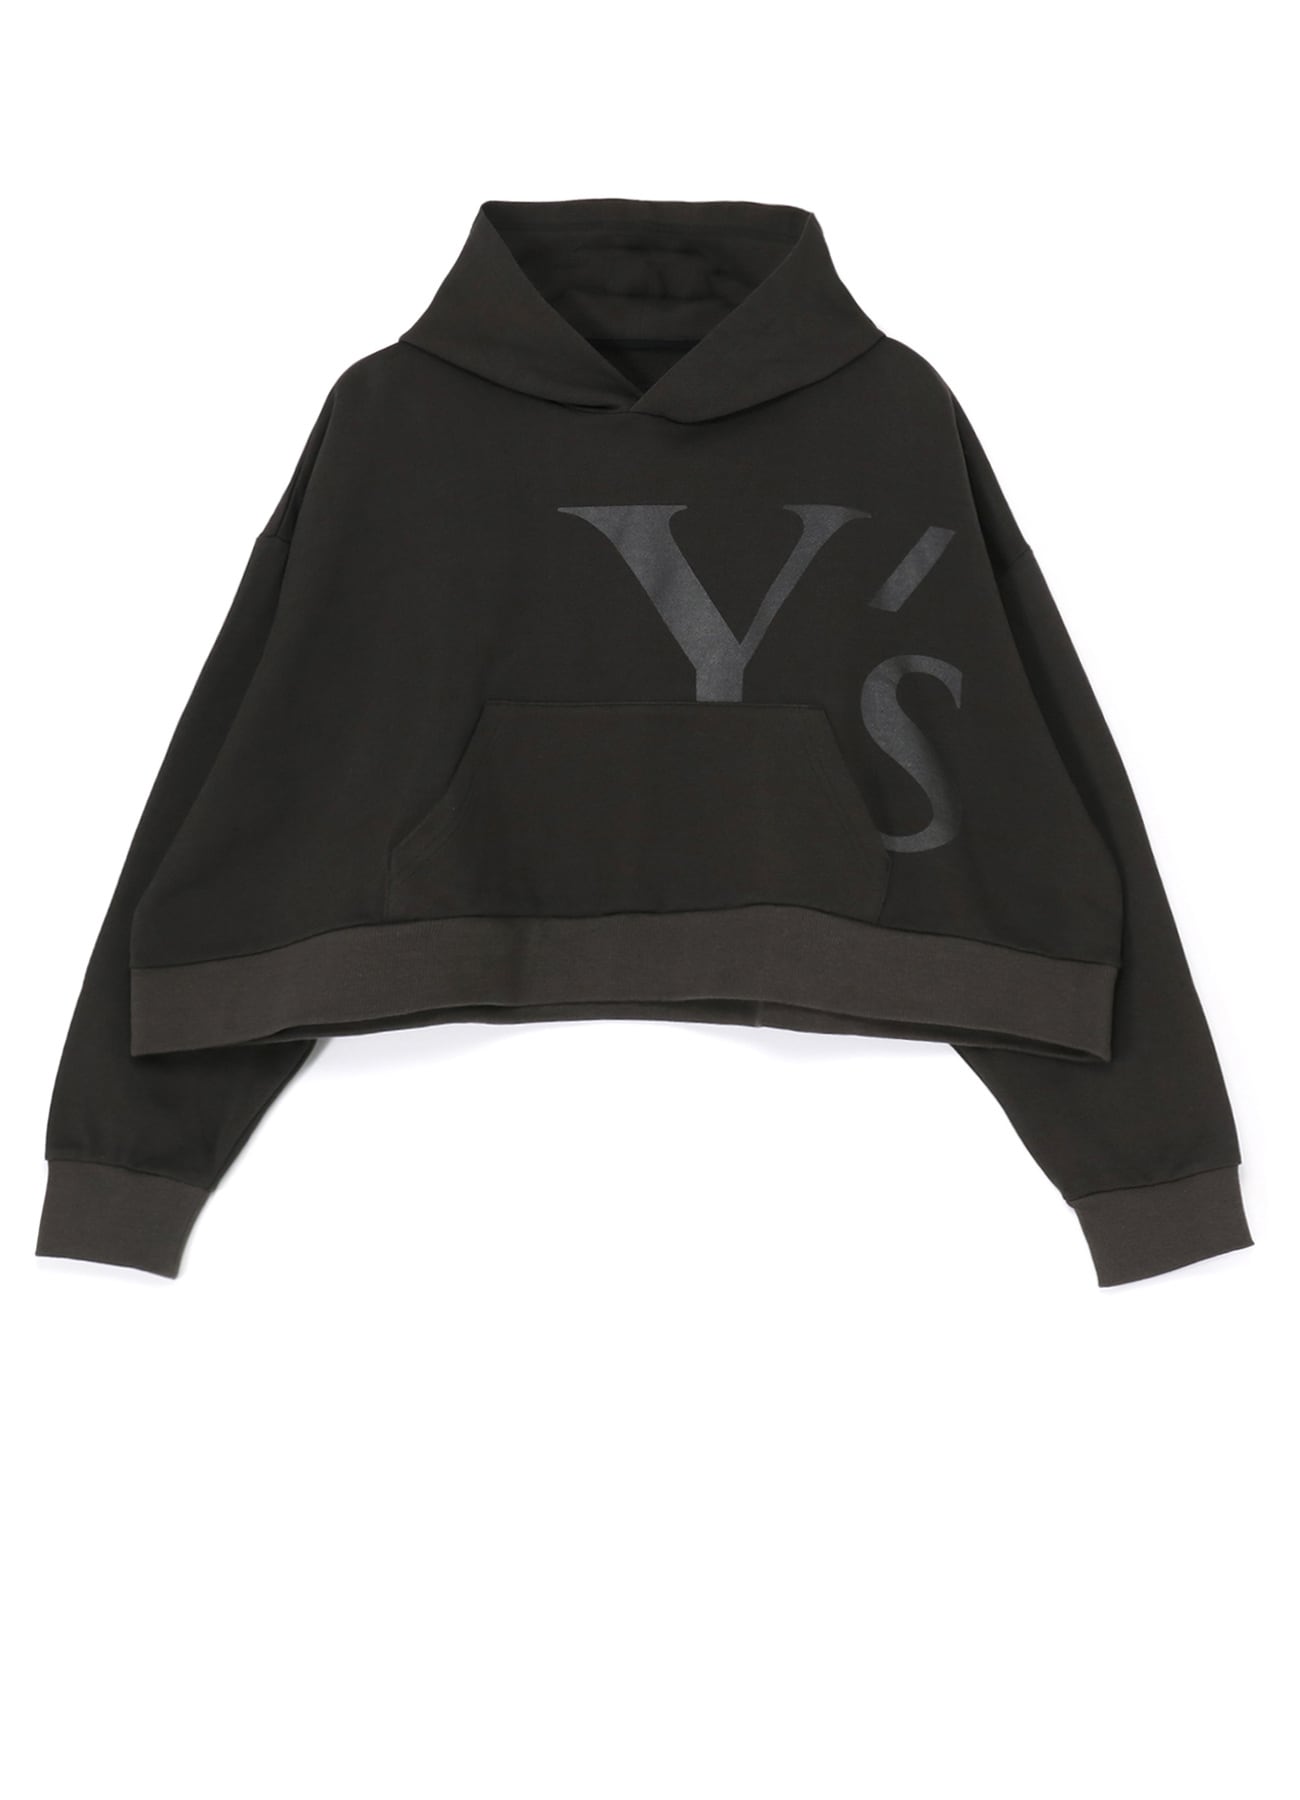 Y'S PIGMENT PRINT CROPPED HOODIE(S Charcoal): Y's｜THE SHOP YOHJI 